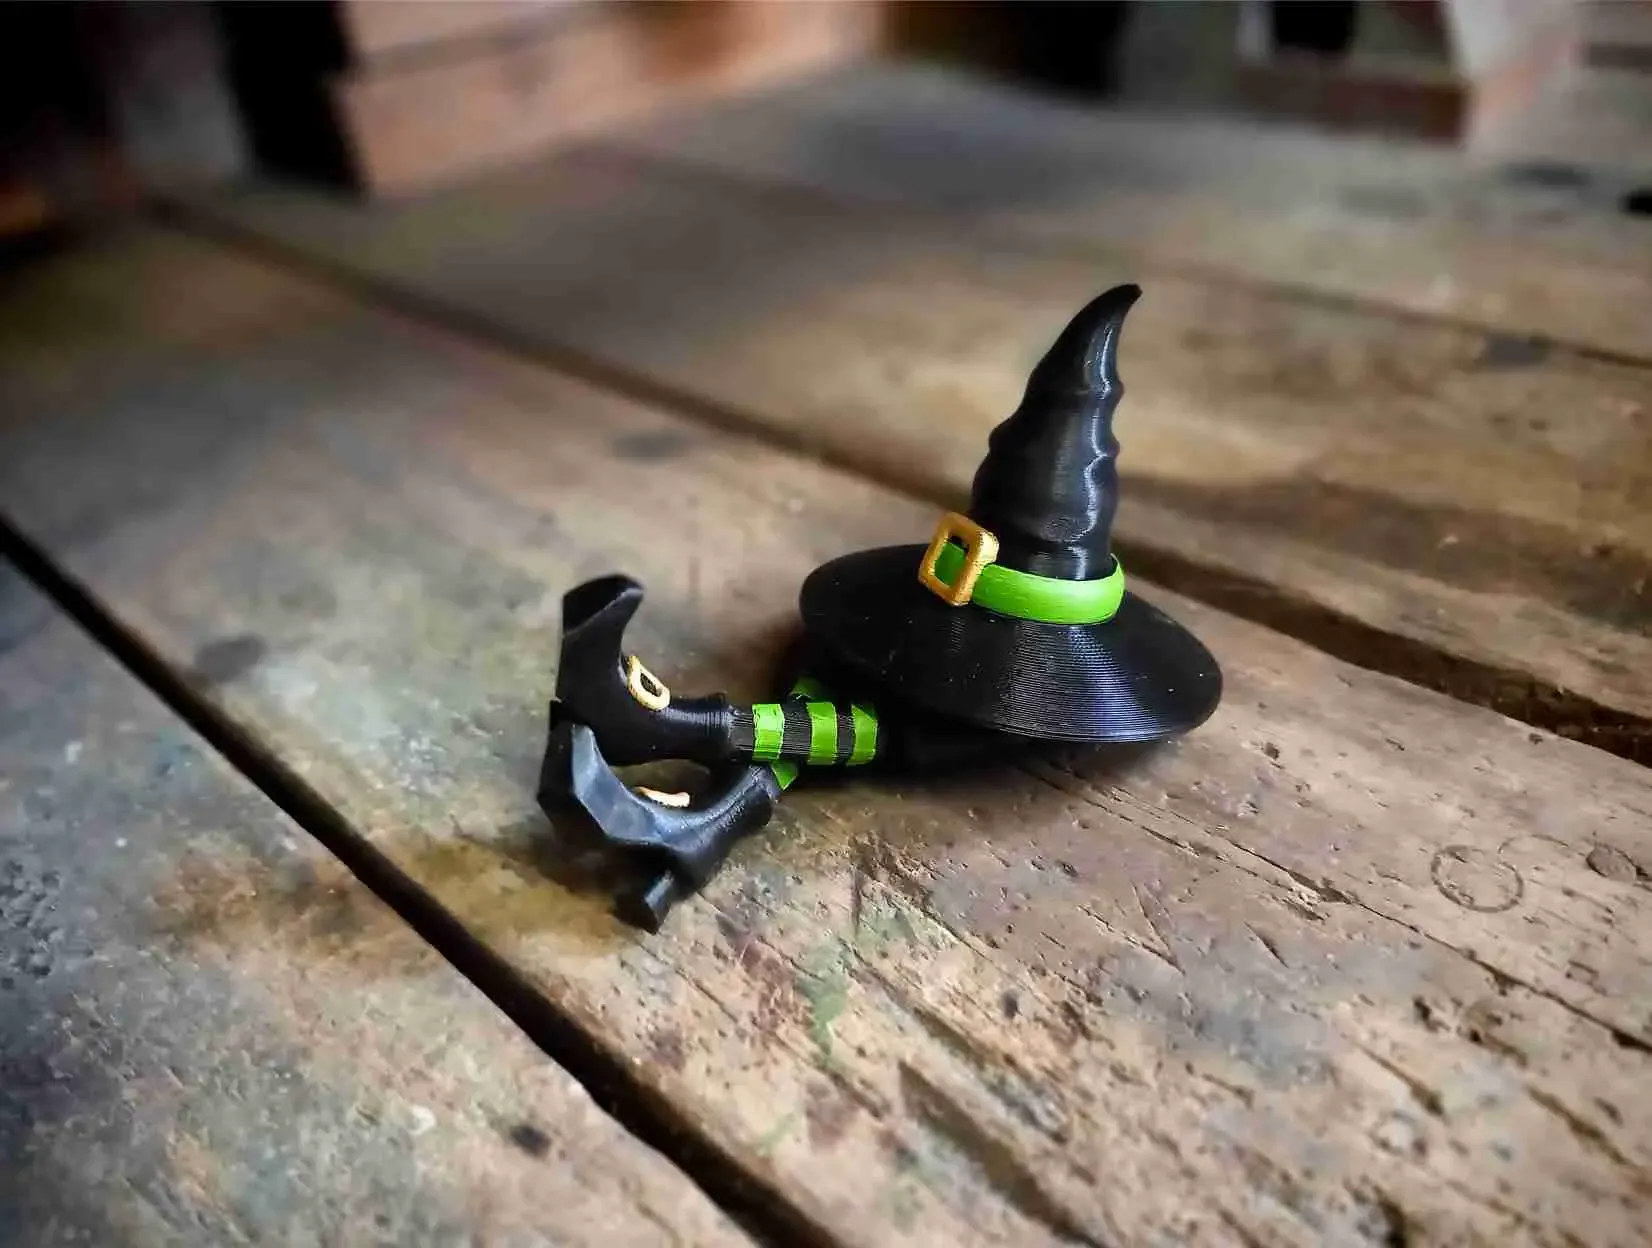 LITTLE WITCH HAT - WITH LEGS